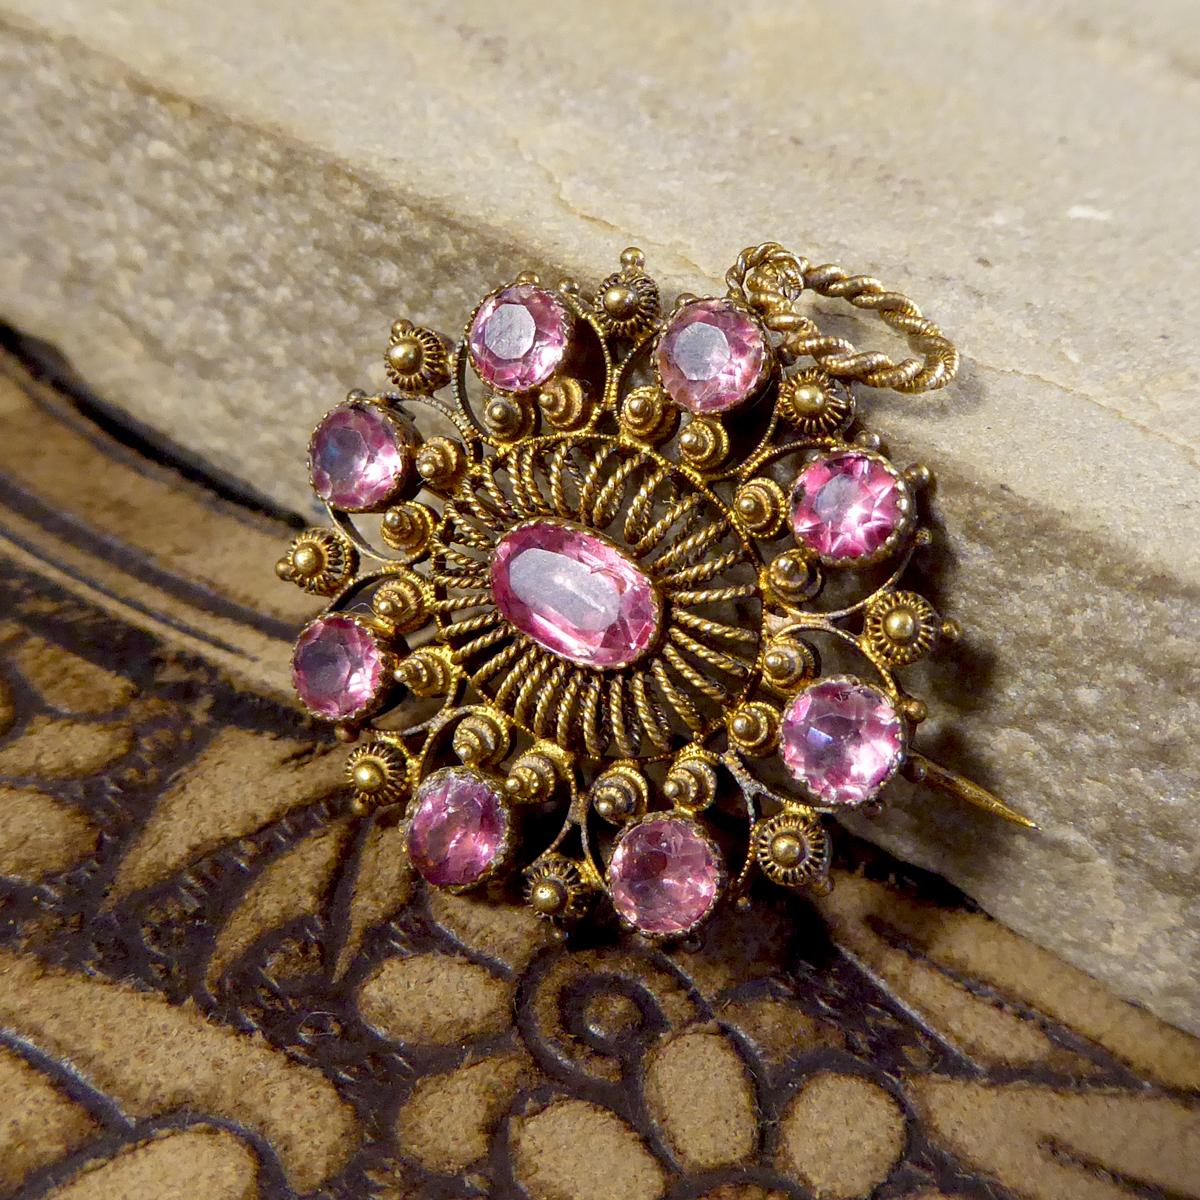 This lovely pendant/brooch is showing such quality aesthetic from the Early Victorian era. It is in a circular shape and set with pink gemstones that have foiled behind so as to give them a translucent effect. In such lovely condition and wearable,